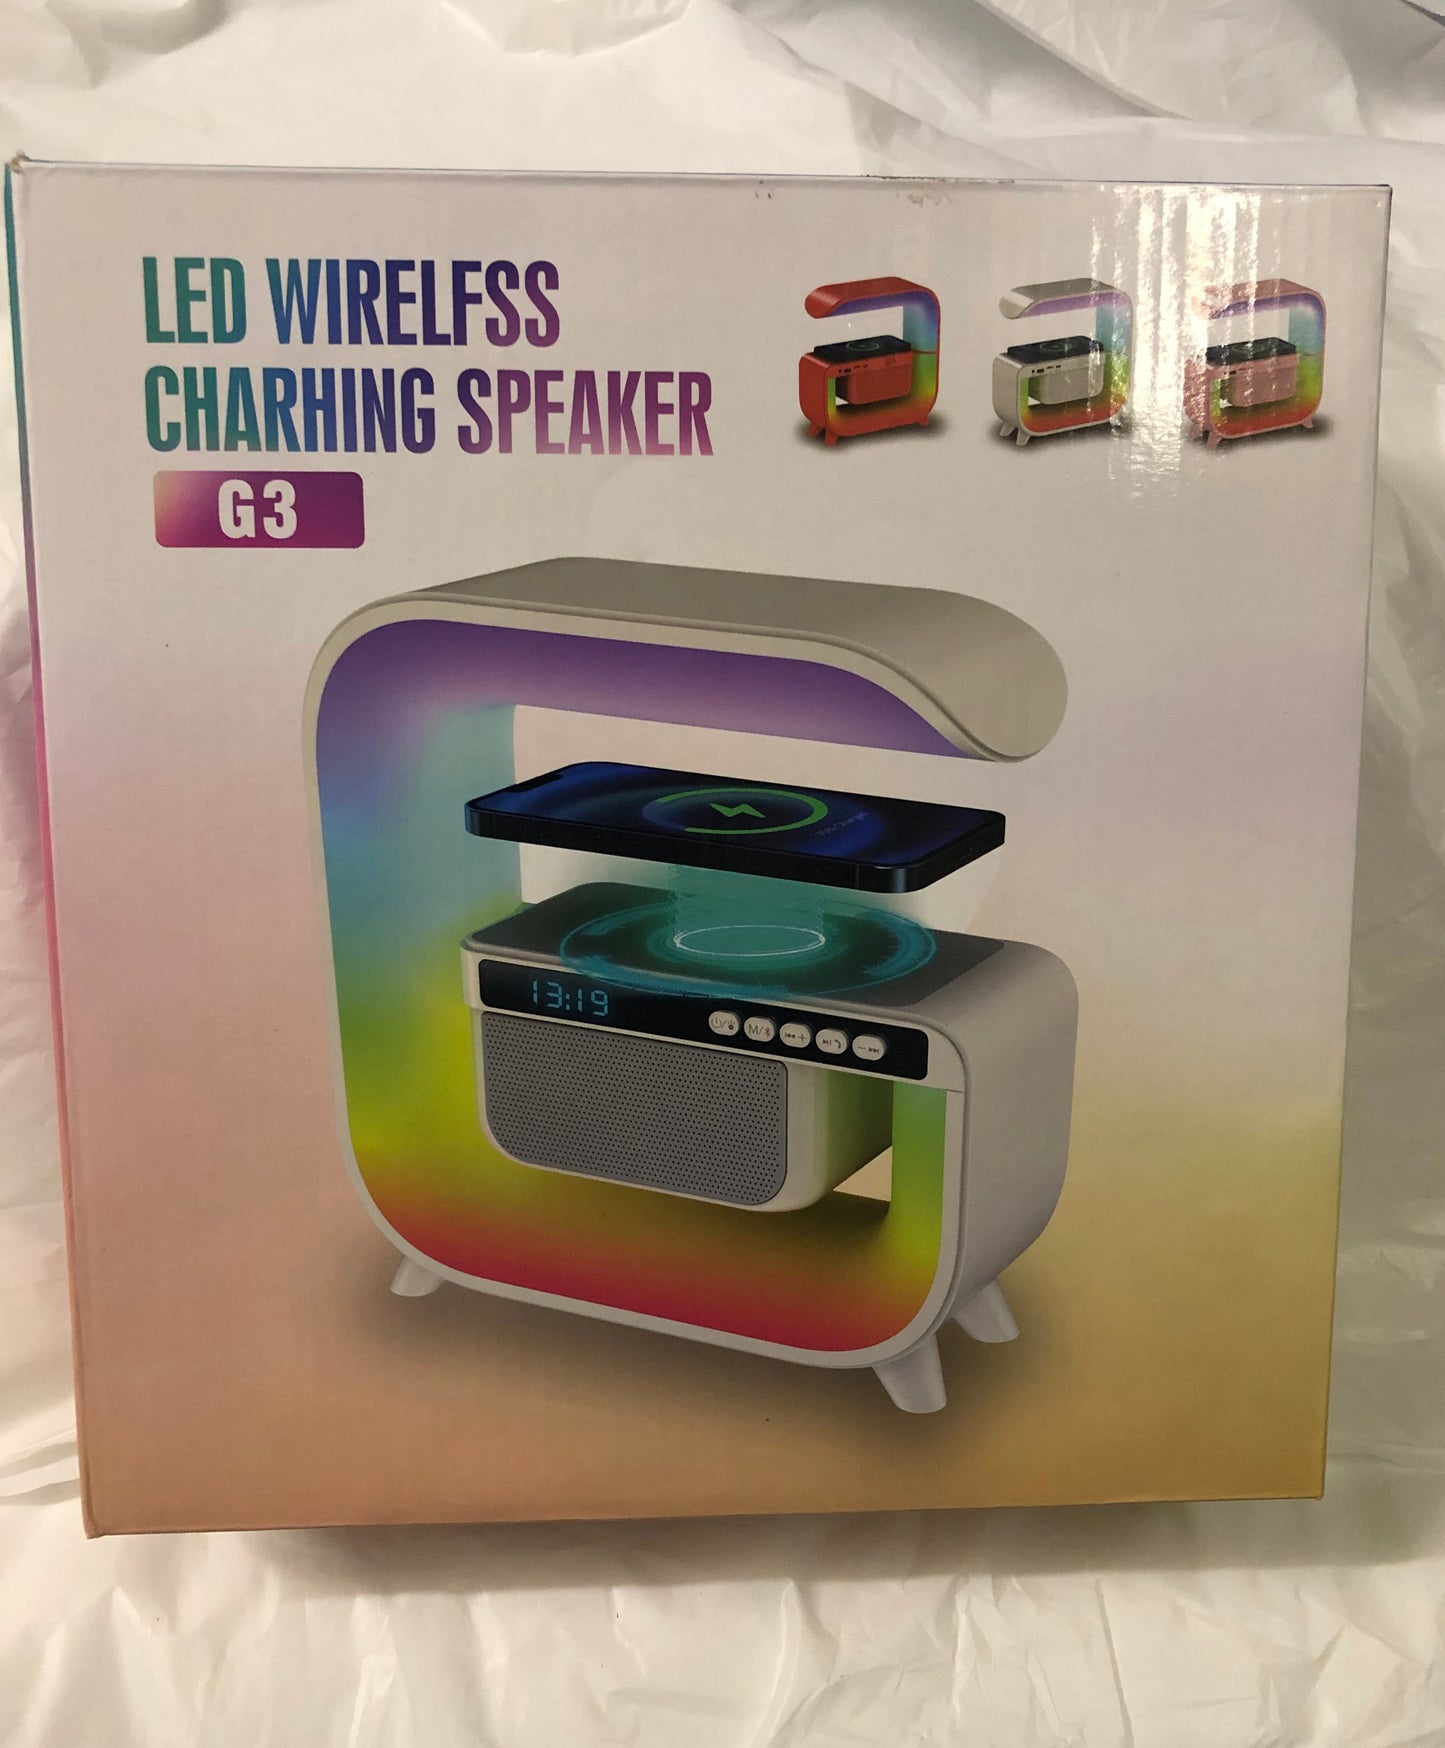 LED Wireless Charhing Speakers G3 Great Christmas Gift  Color White "New Arrival"